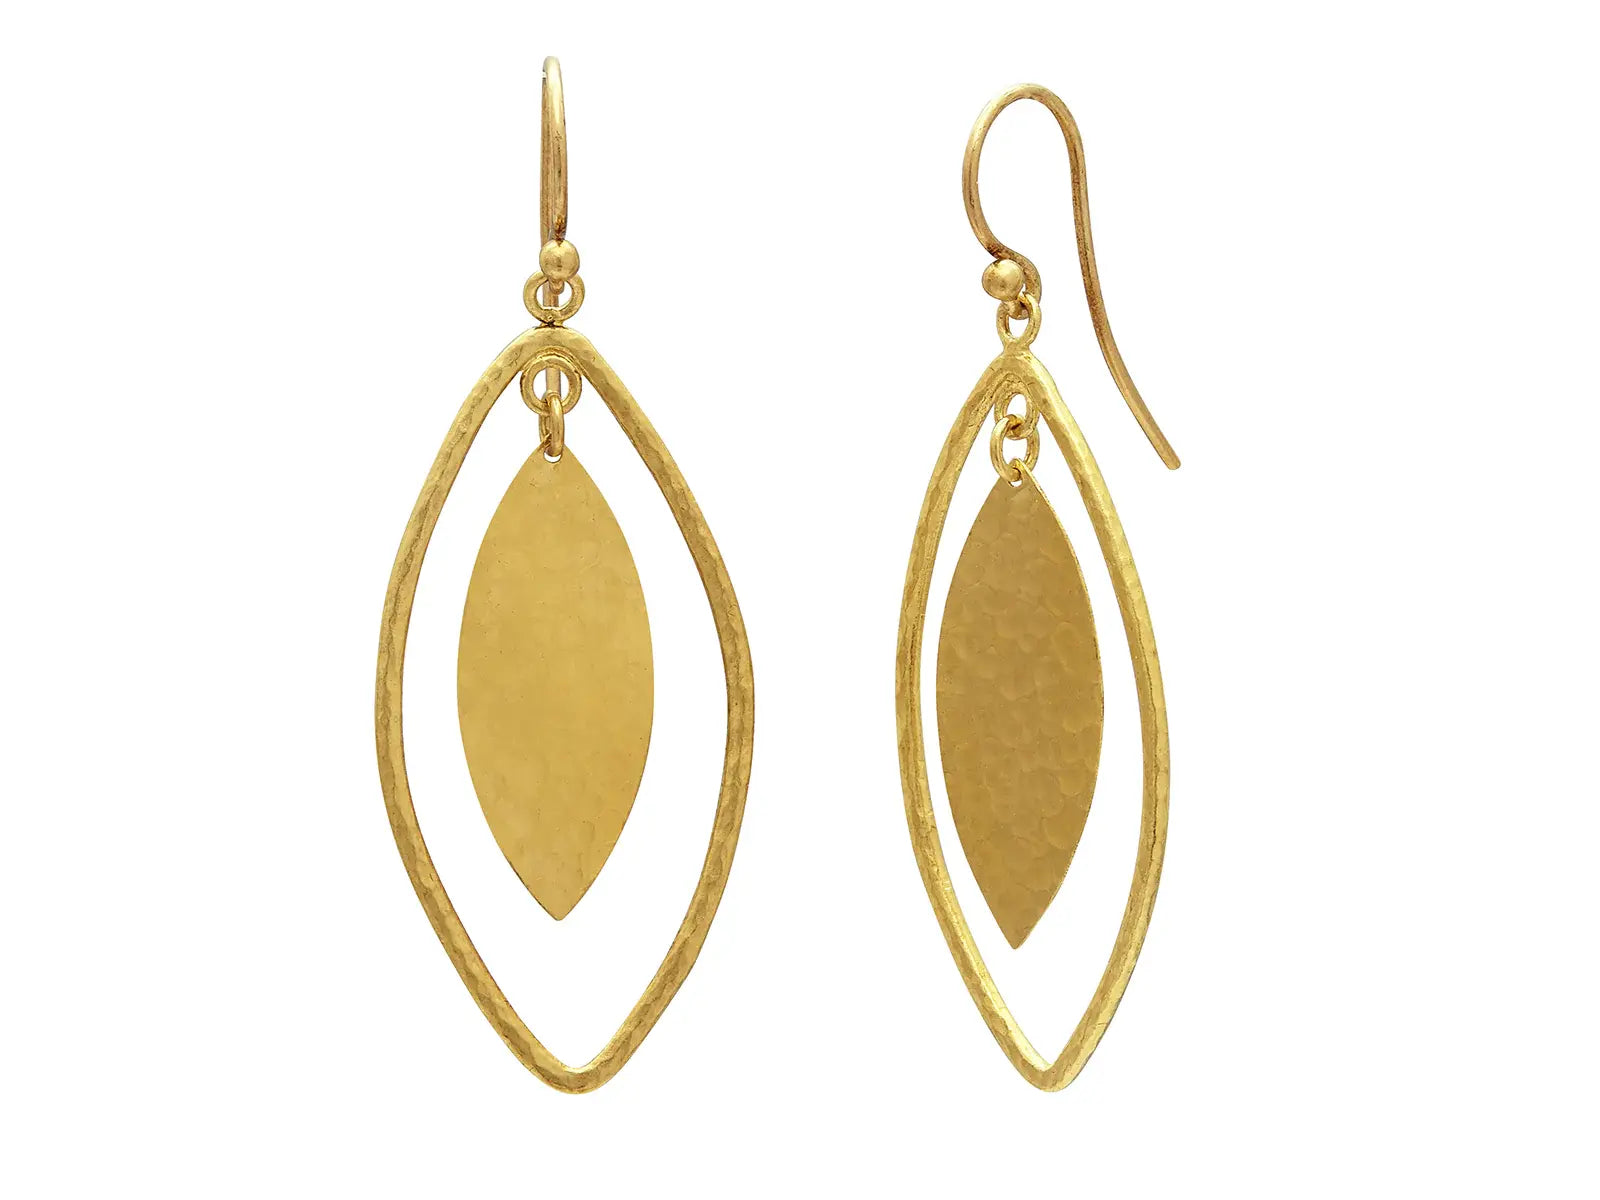 GURHAN Willow Gold Long Drop Earrings, Marquise Shape on Hook, with No Stone GURHAN Willow Gold Long Drop Earrings, Marquise Shape on Hook, with No Stone Gurhan Gurhan  Squash Blossom Vail